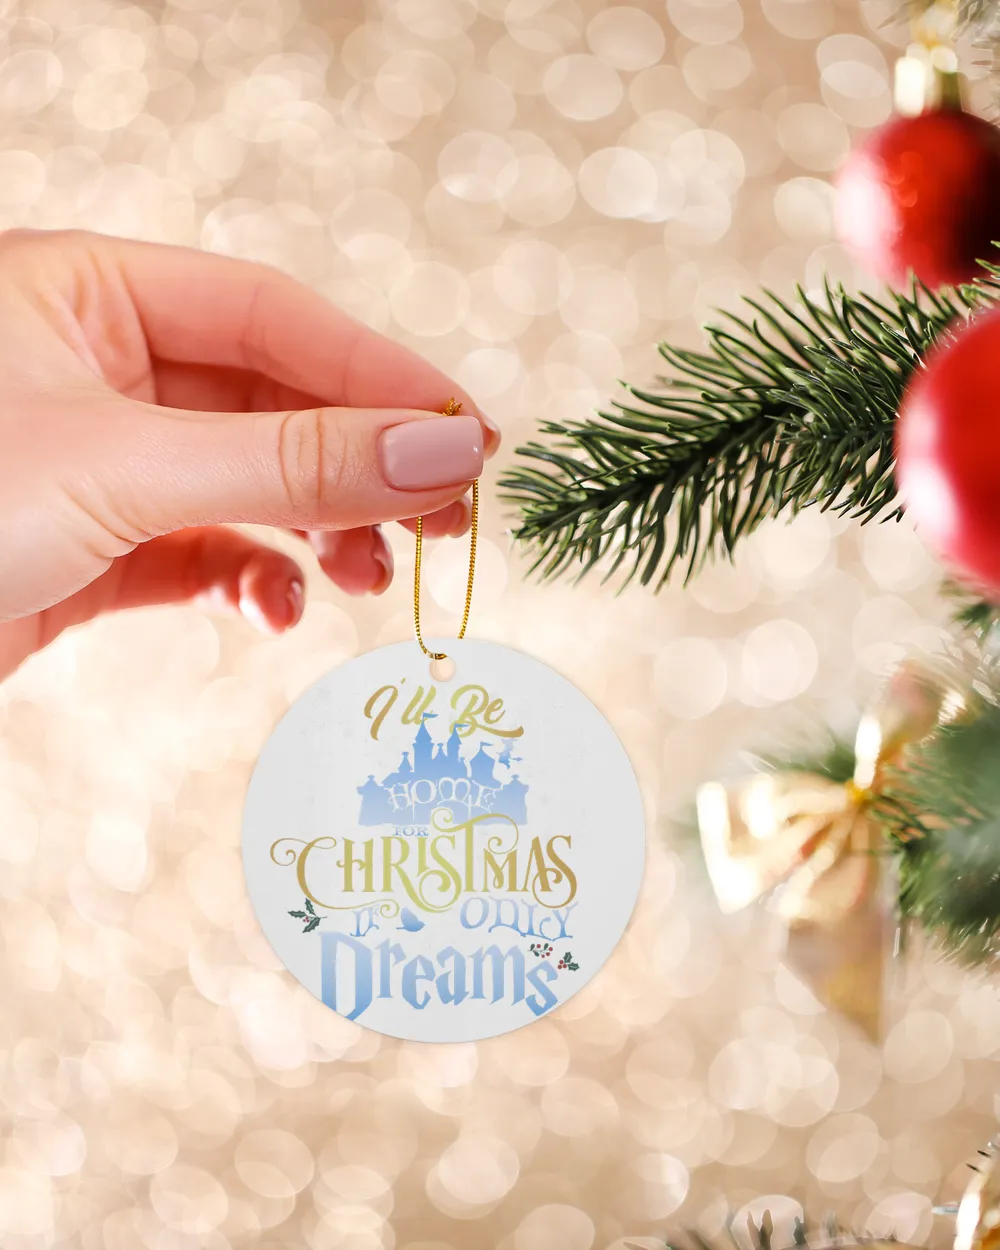 I'll Be Home For Christmas If Only Dreams Ornament